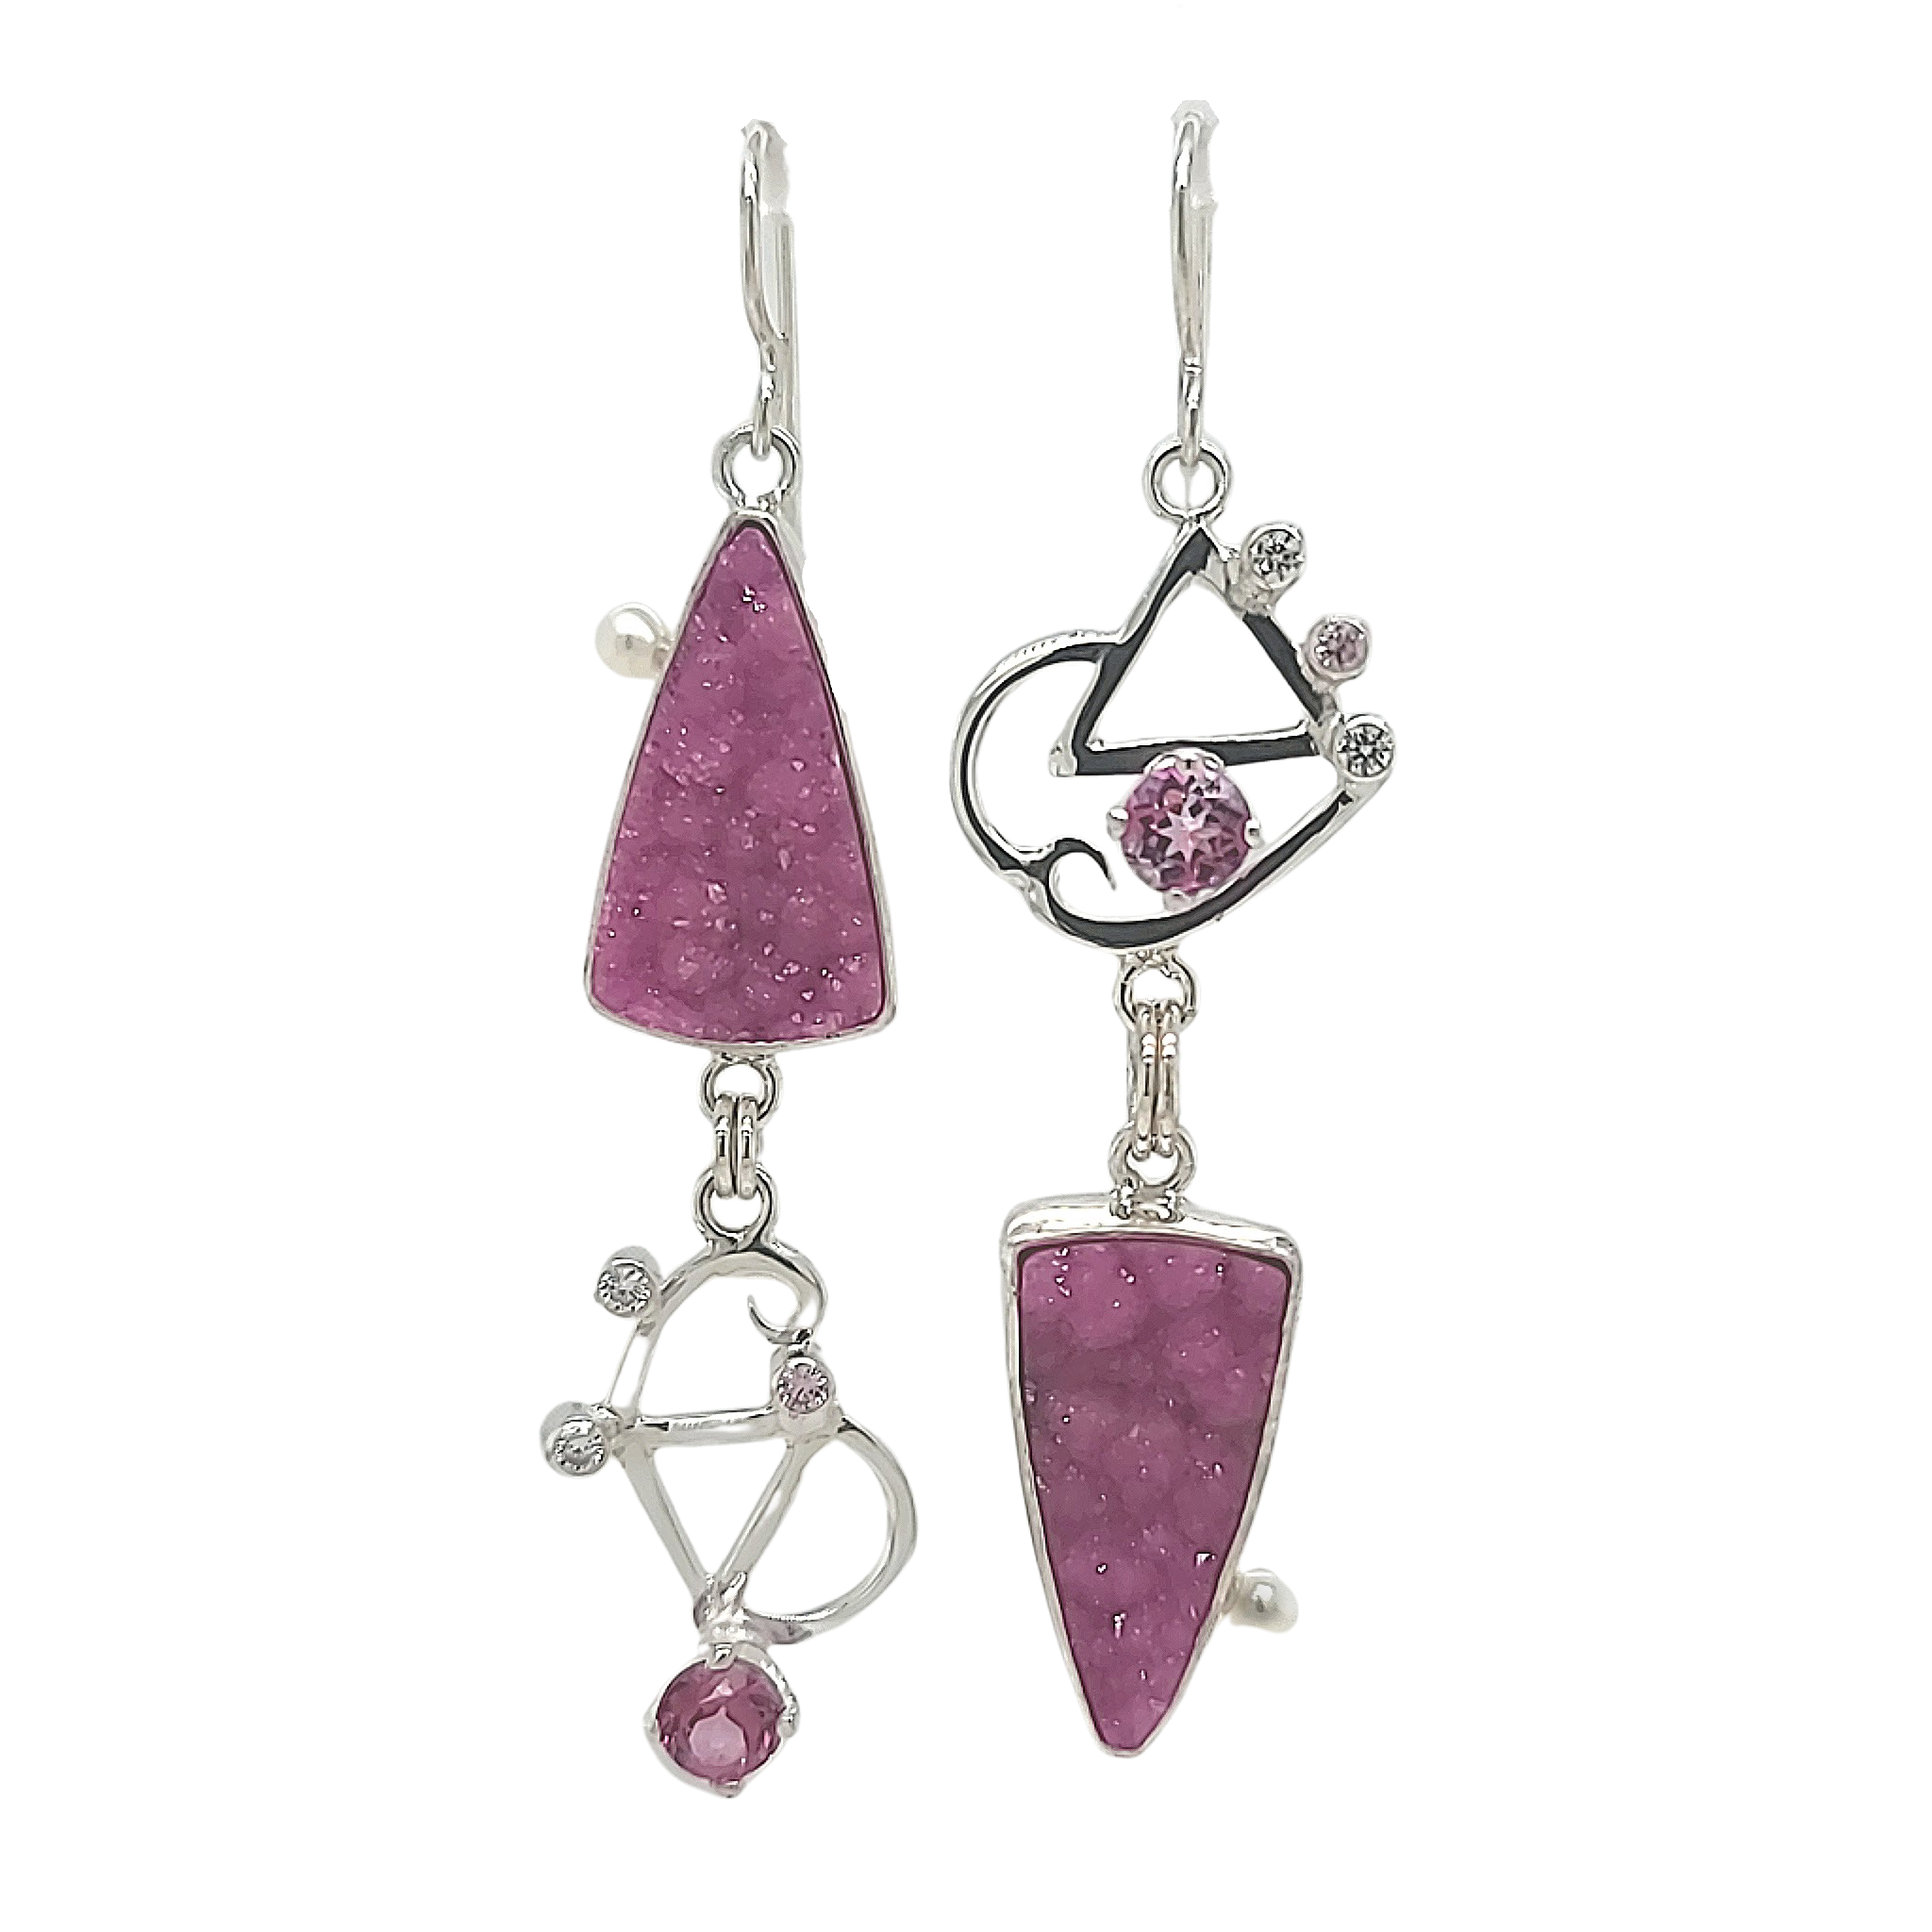 Asymmetric Cobalto Calcite Pink Drusy, Lab Pink Topaz, Cubic Zirconia and Freshwater Pearls set in Sterling Silver.